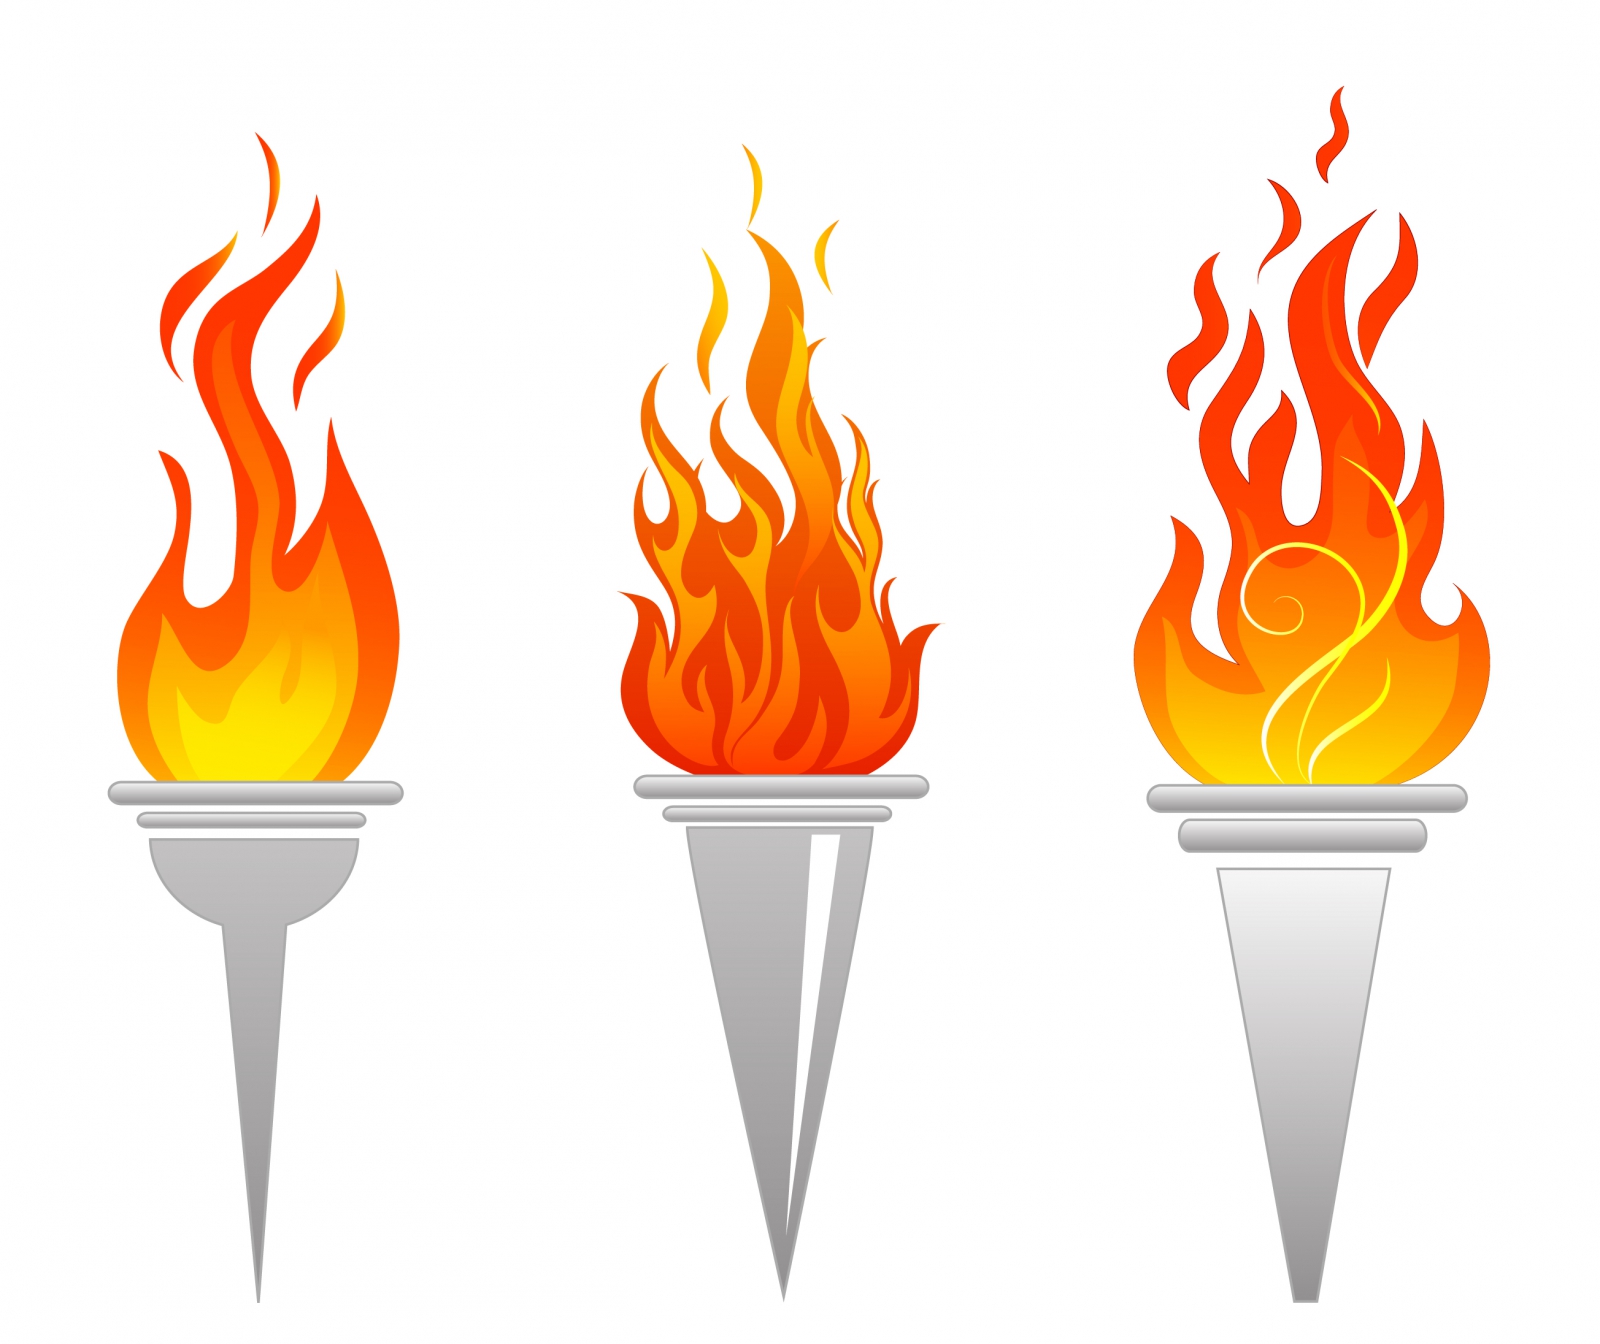 Free Torch, Download Free Clip Art, Free Clip Art on Clipart